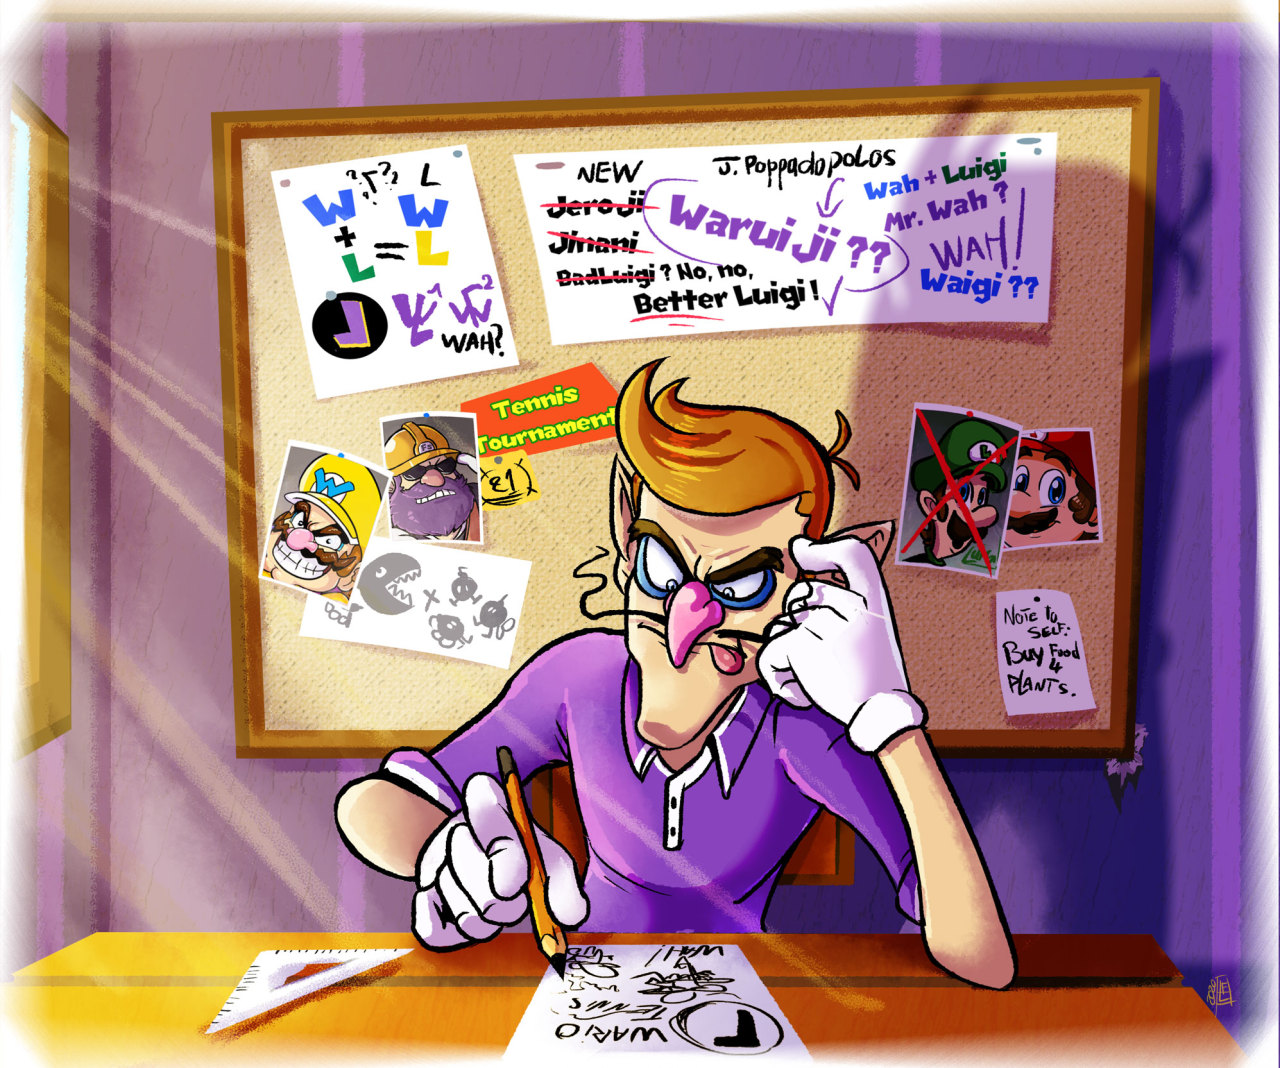 Becoming Waluigi.
Little set up to one of my previous drawing about Waluigi’s origins.
I just like to think that he actually worked really hard on his schema and his new persona. I’m not saying that Wario didn’t helped at it, but I do think that...